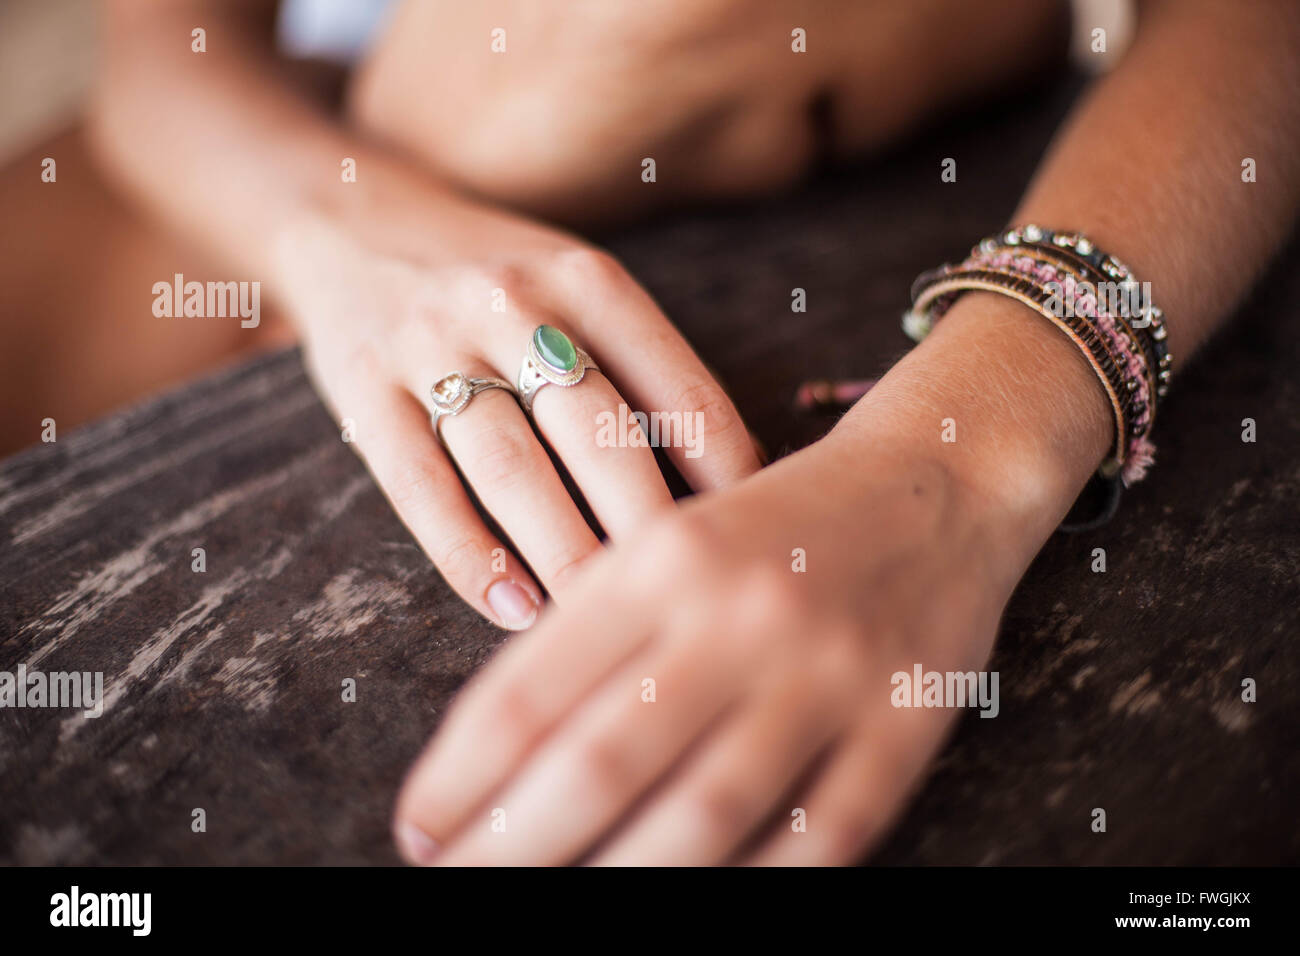 Close-Up View Of Woman's Hands Stock Photo